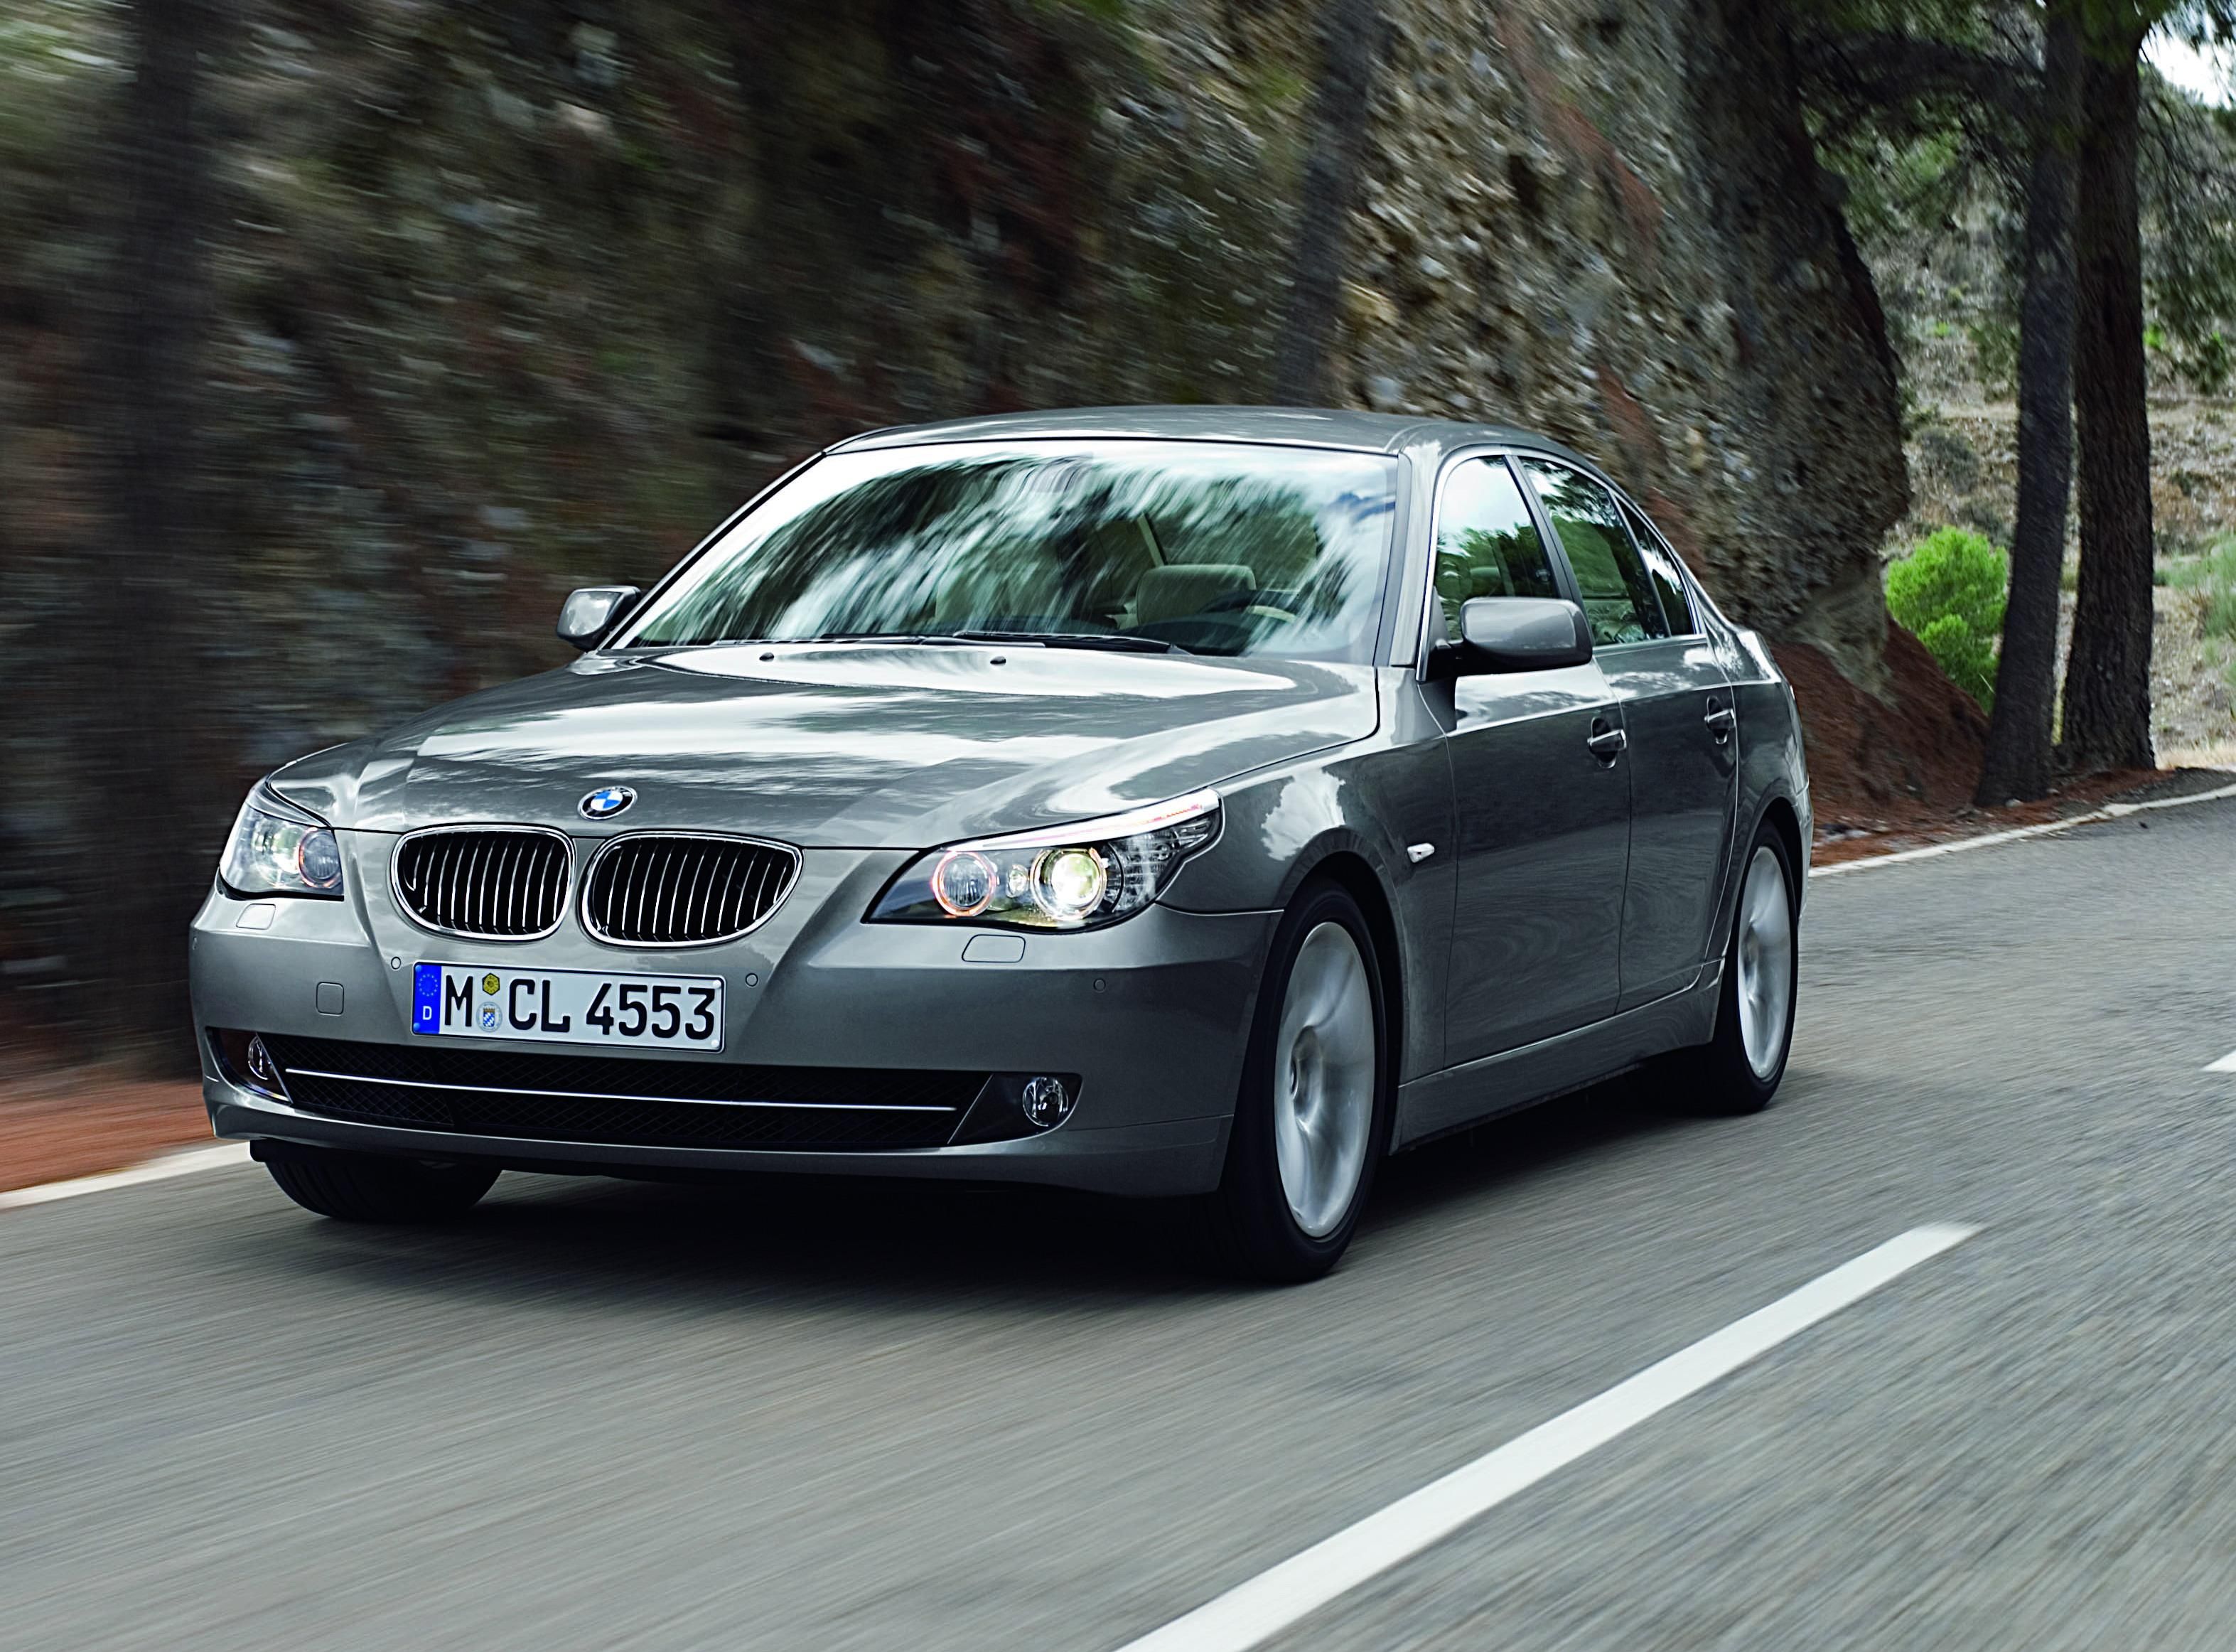 2020 The Cool and Sad History Of The BMW 5 Series E60